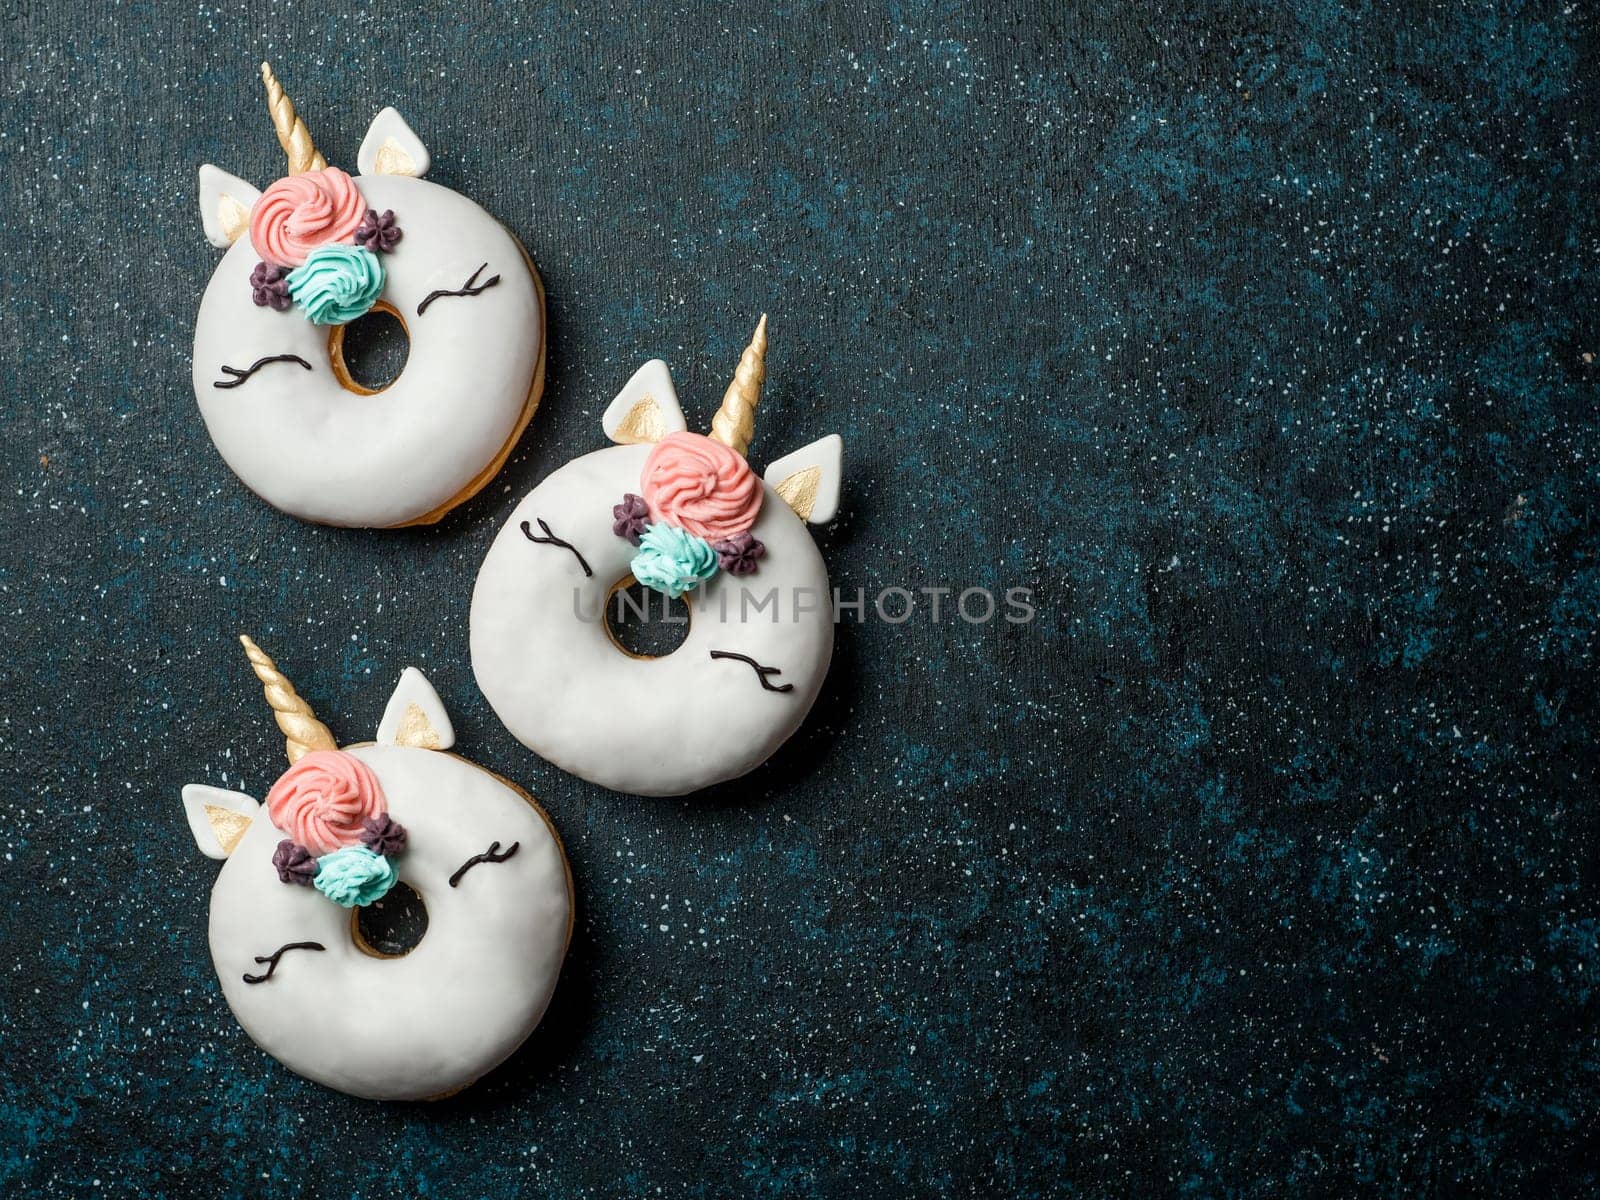 Unicorn donuts over dark background. Trendy donut unicorn with white glaze. Top view or flat lay. Copy space for text.